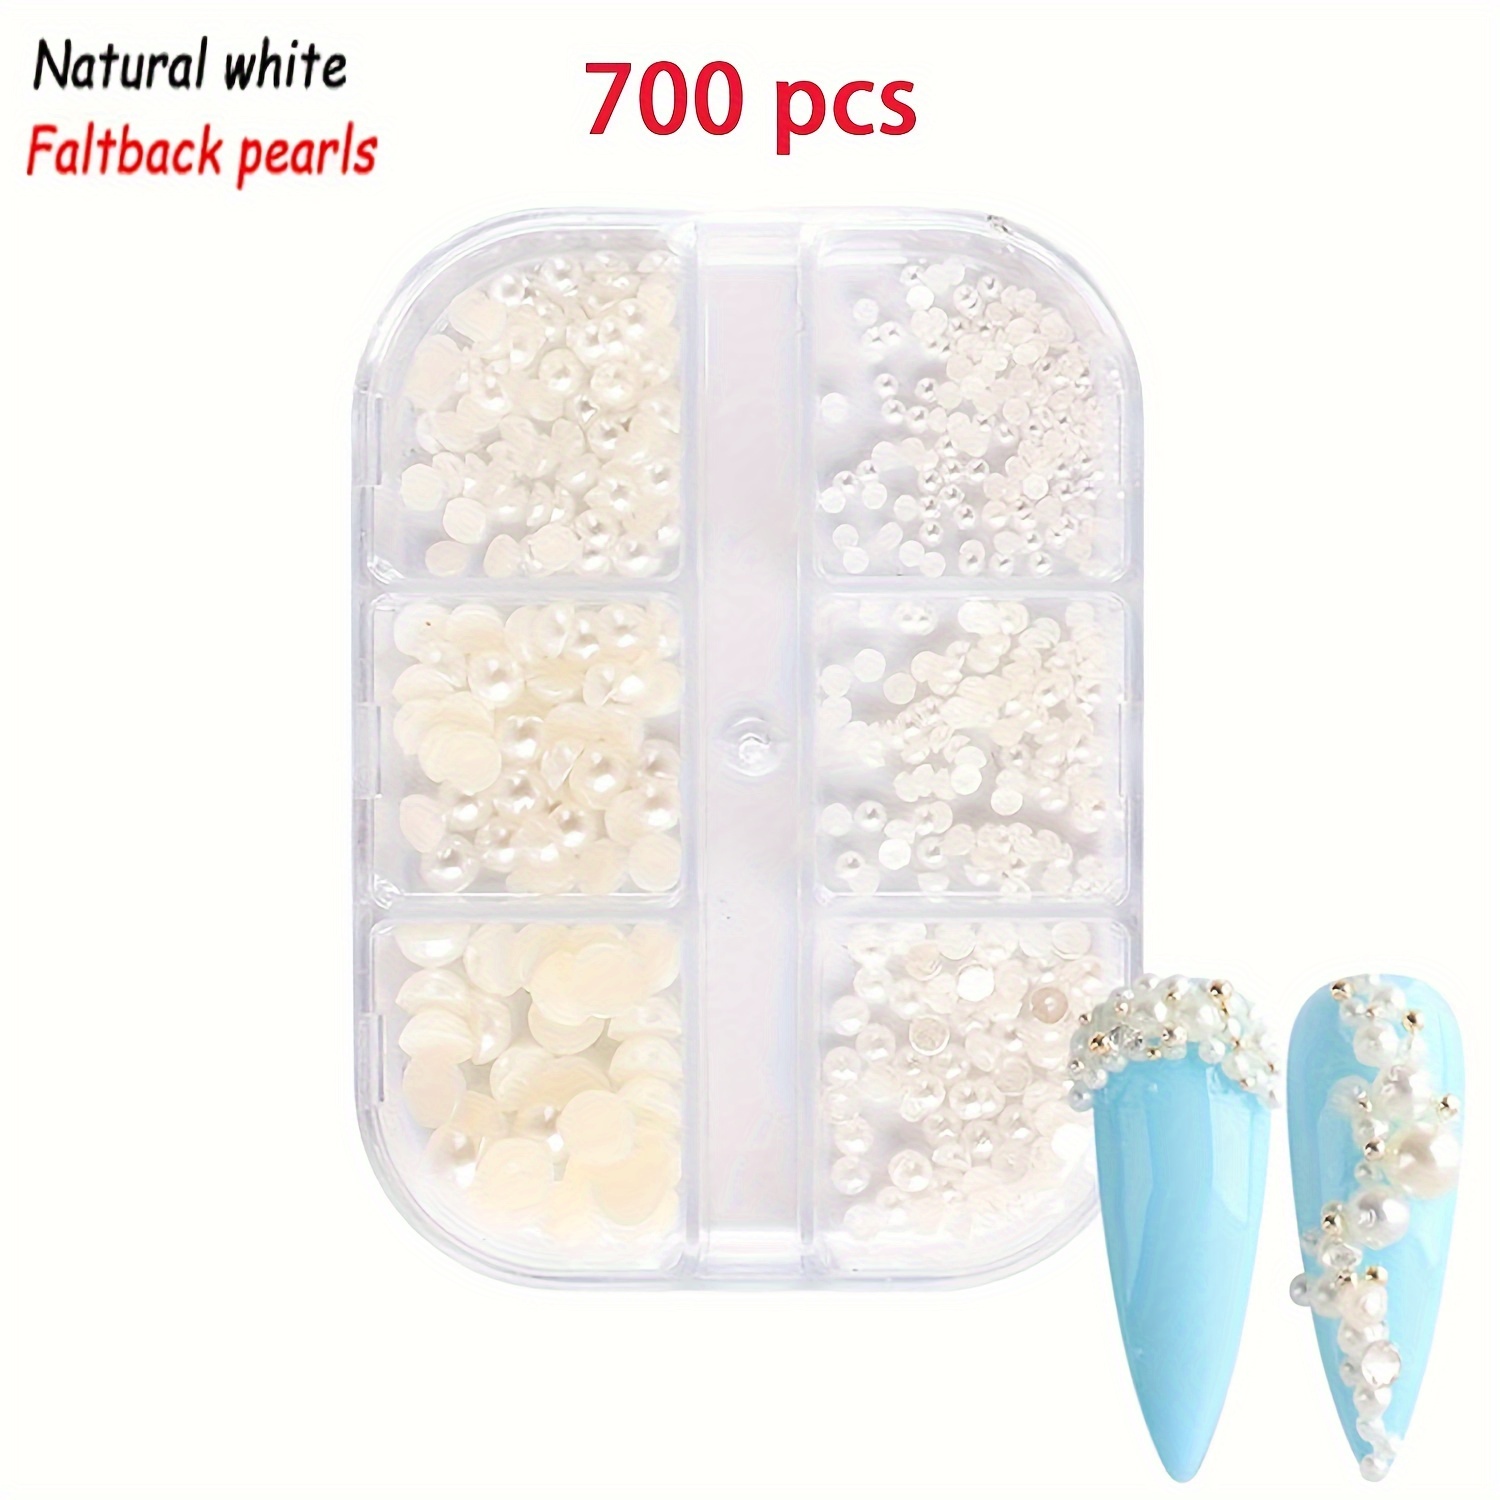  Makandup 6000 Pcs Nail Pearls for Nails Art,Gold Half Pearls  for Crafts,Flatback Pearls for Face Eyes Makeup,Round Flat Back Pearl for  Charms DIY Crafting Decorations Accessories : Beauty & Personal Care